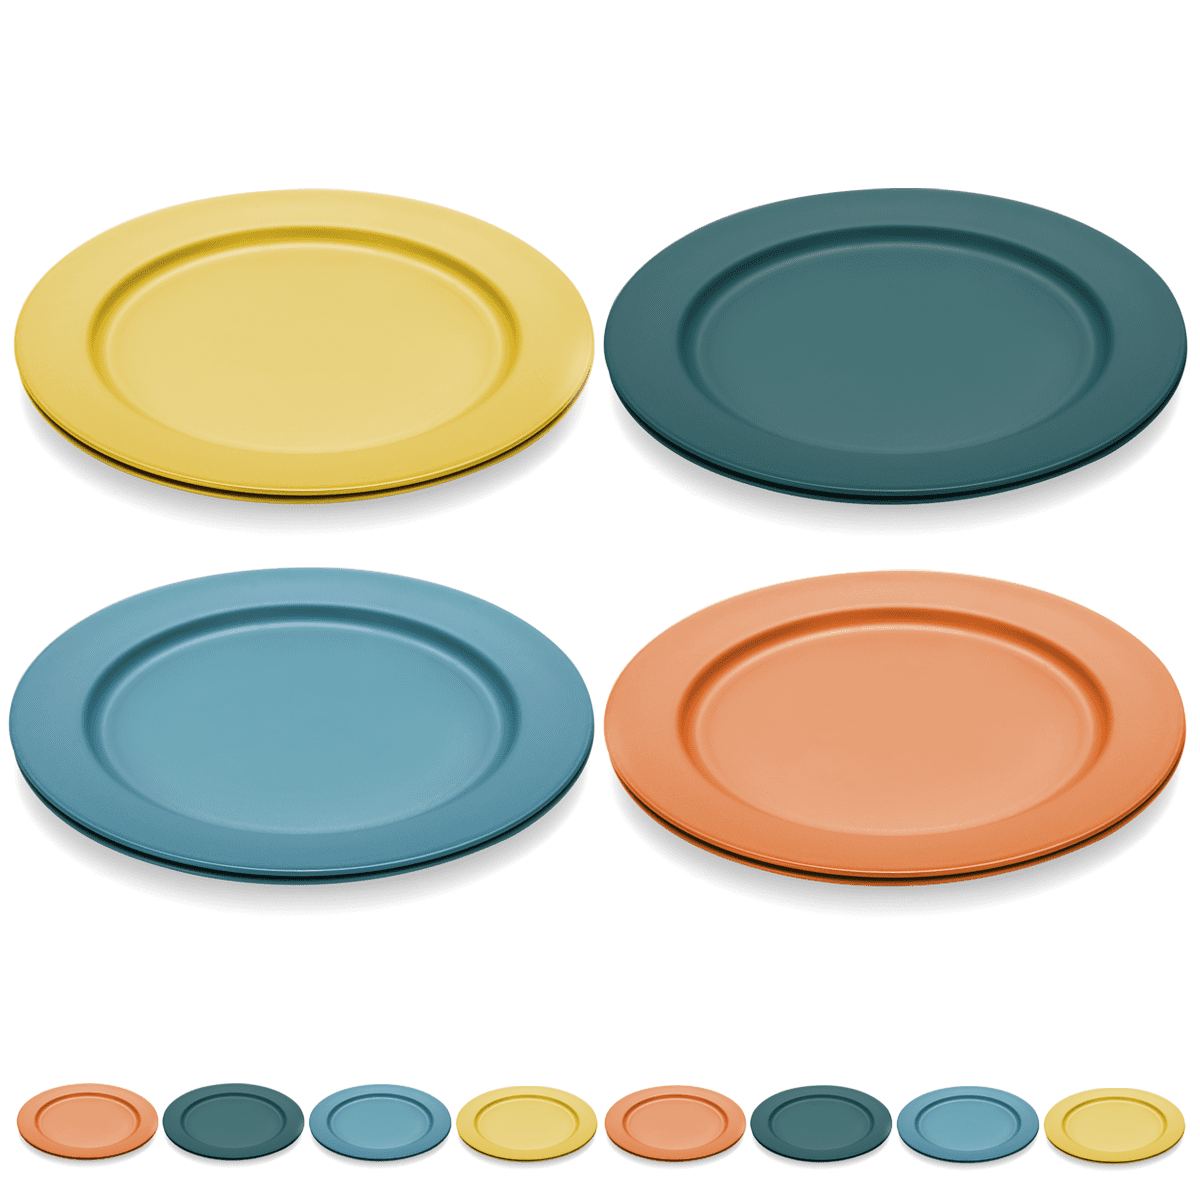 Dishwasher Safe,BPA Free Unbreakable and Reusable 10-inch Plastic Dinner Plates Everyday Plates Set of 8 Aqua 